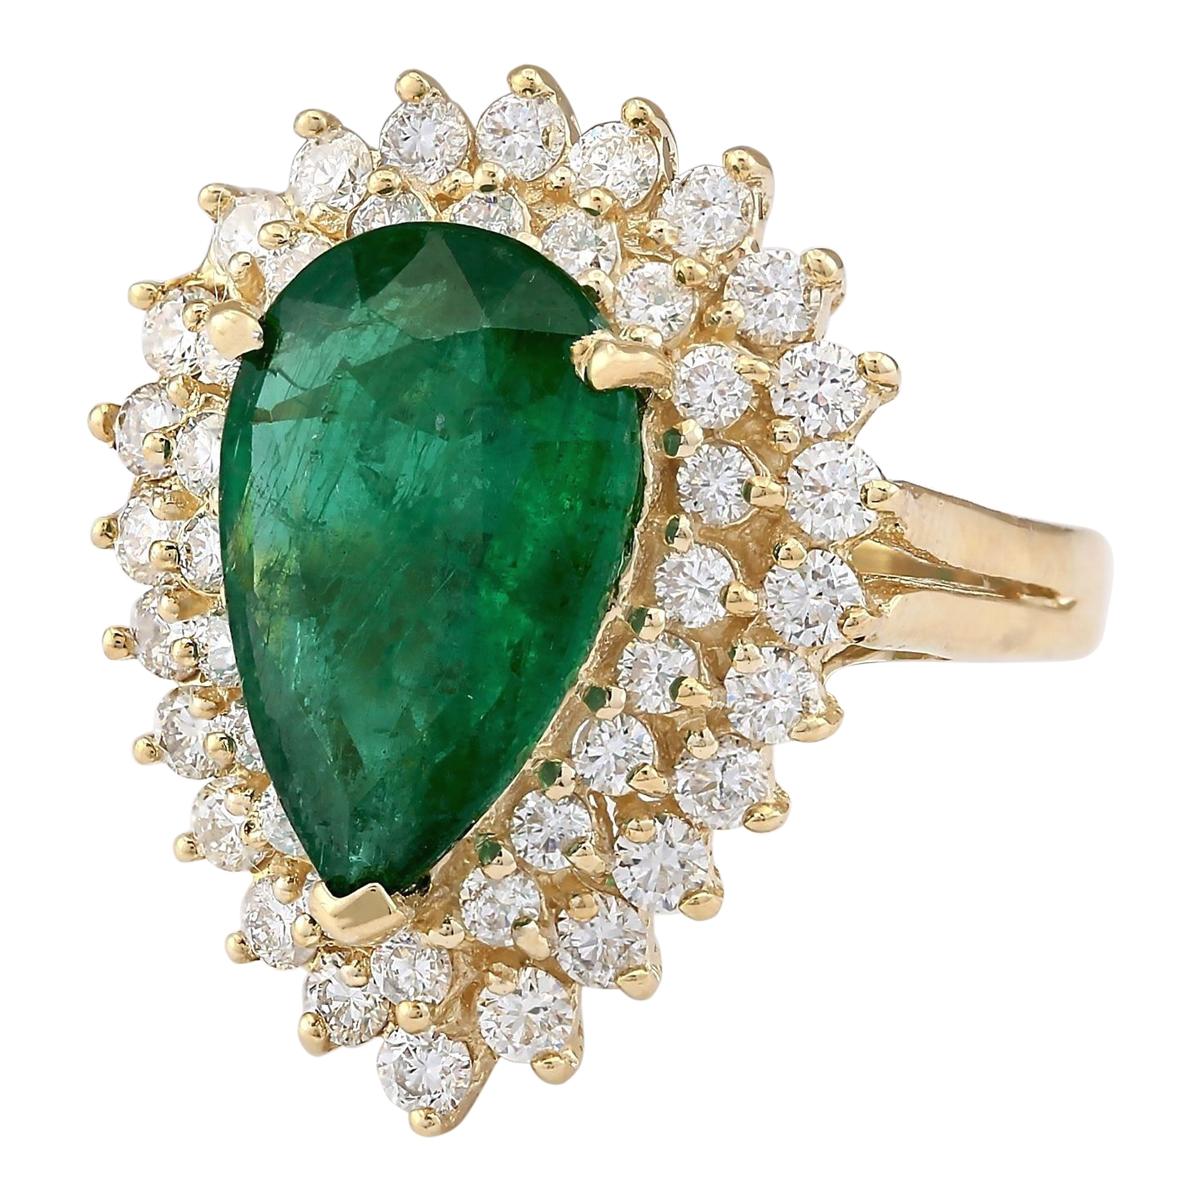 Introducing our exquisite 5.84 Carat Emerald 14 Karat Yellow Gold Diamond Ring. Crafted from stamped 14K Yellow Gold, this ring boasts a weight of 7.0 grams, ensuring both quality and durability. The focal point is a stunning emerald gemstone